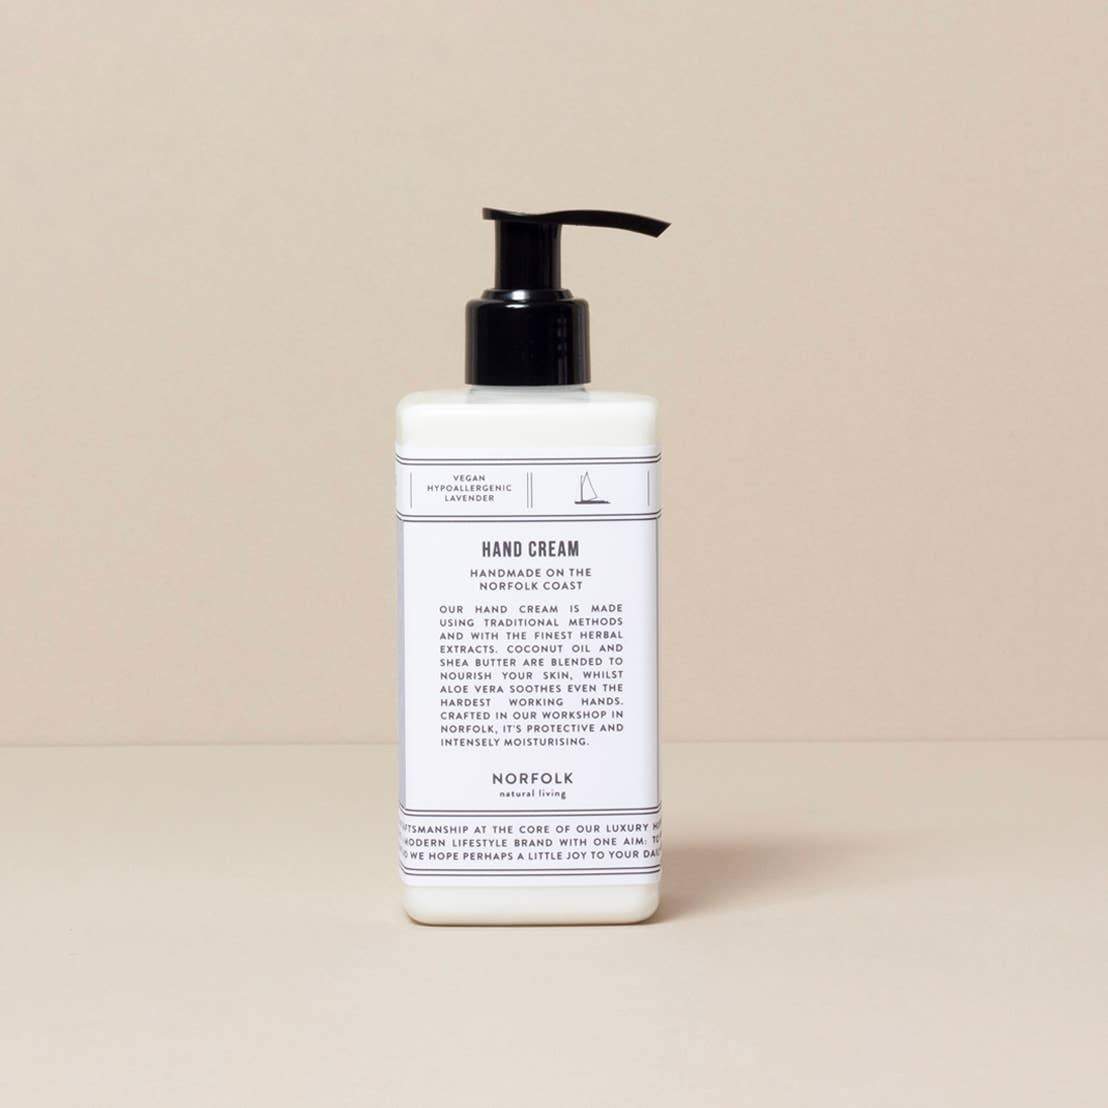 A bottle of moisturizing Norfolk Natural Living Lavender hand lotion with a pump dispenser, against a neutral beige background. The label on the bottle is detailed with text about the product.